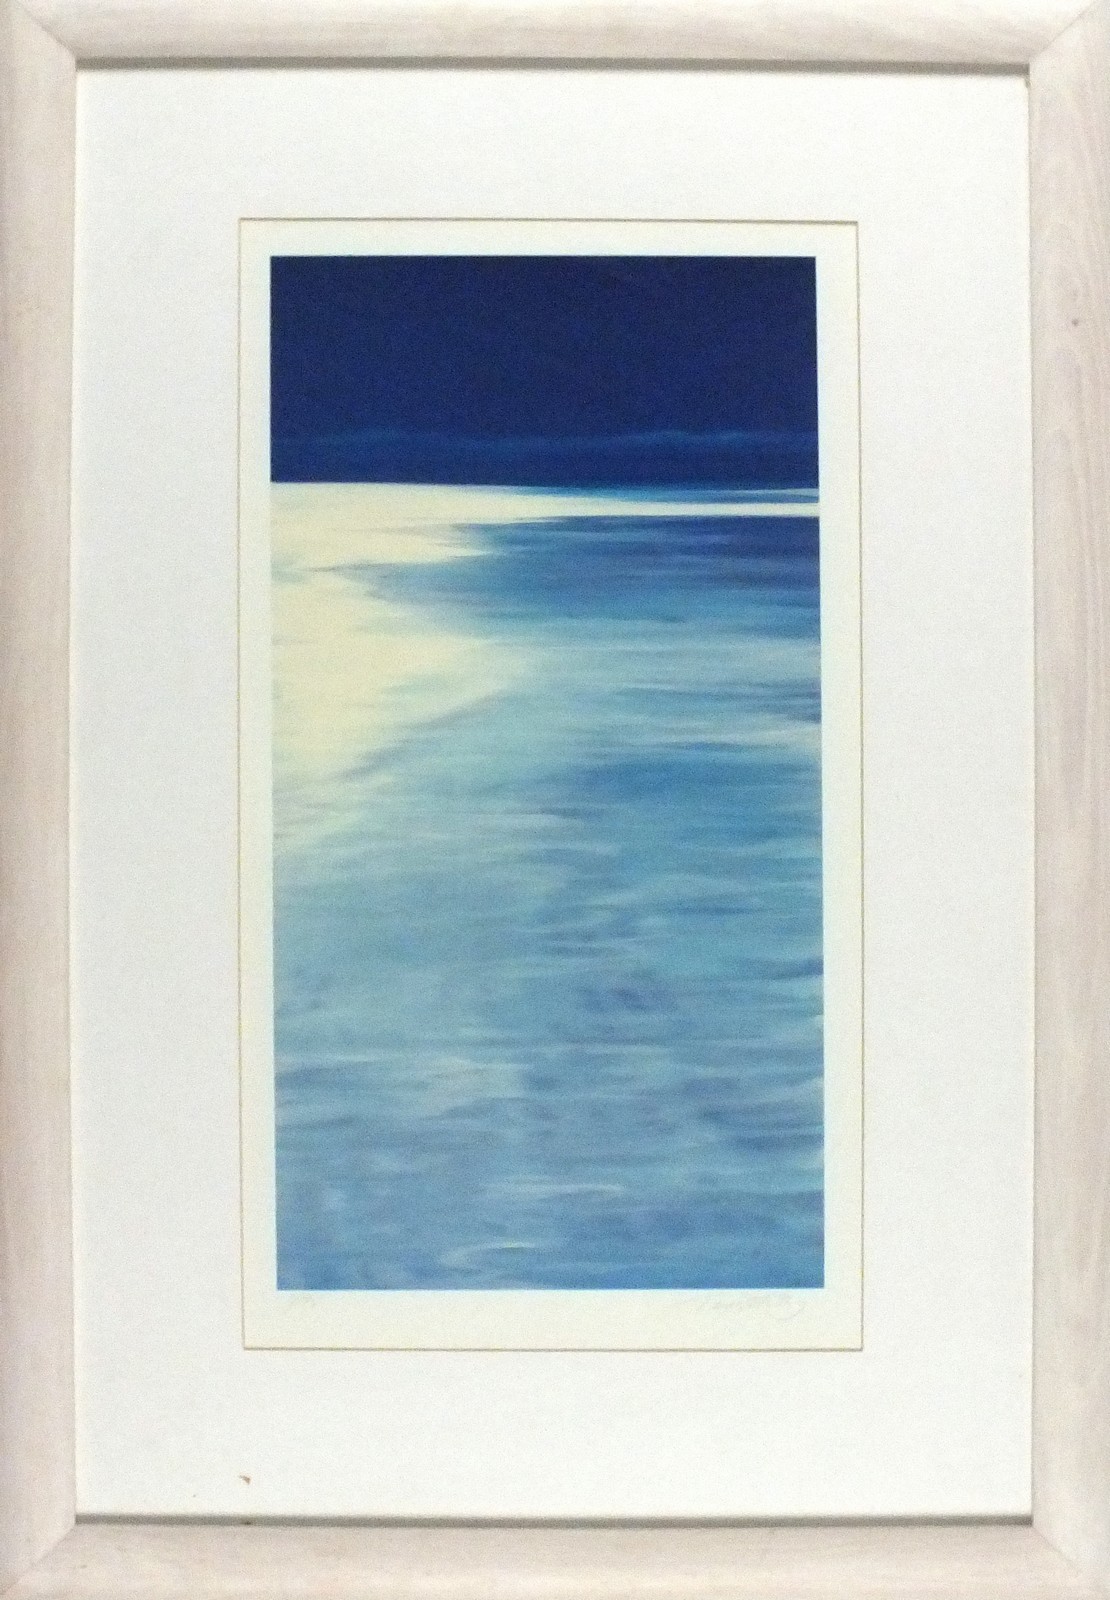 Penelope H STAREY (British 20th Century) Seascape, Lithograph, Signed and numbered 4/175 in pencil - Image 4 of 6